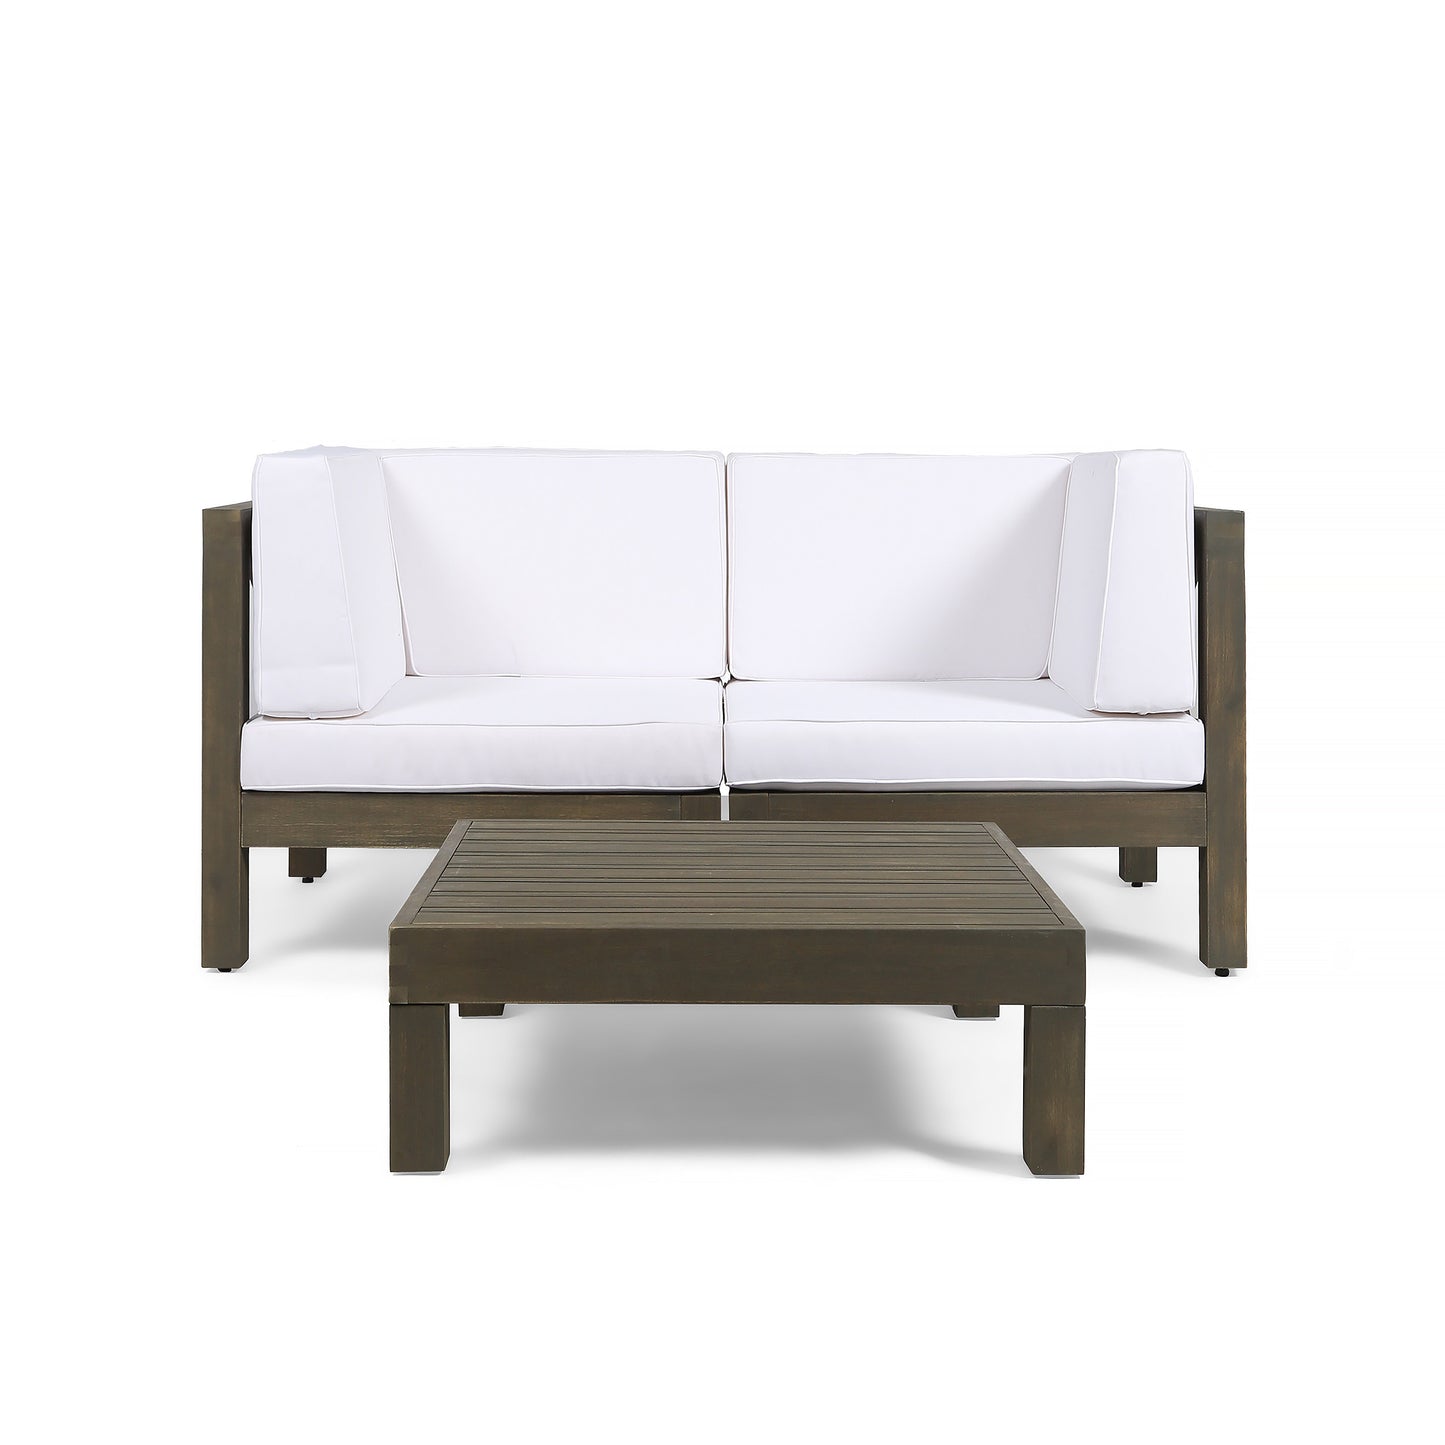 Dawson Outdoor Sectional Loveseat Set with Coffee Table - 3-Piece 2-Seater - Acacia Wood - Outdoor Cushions